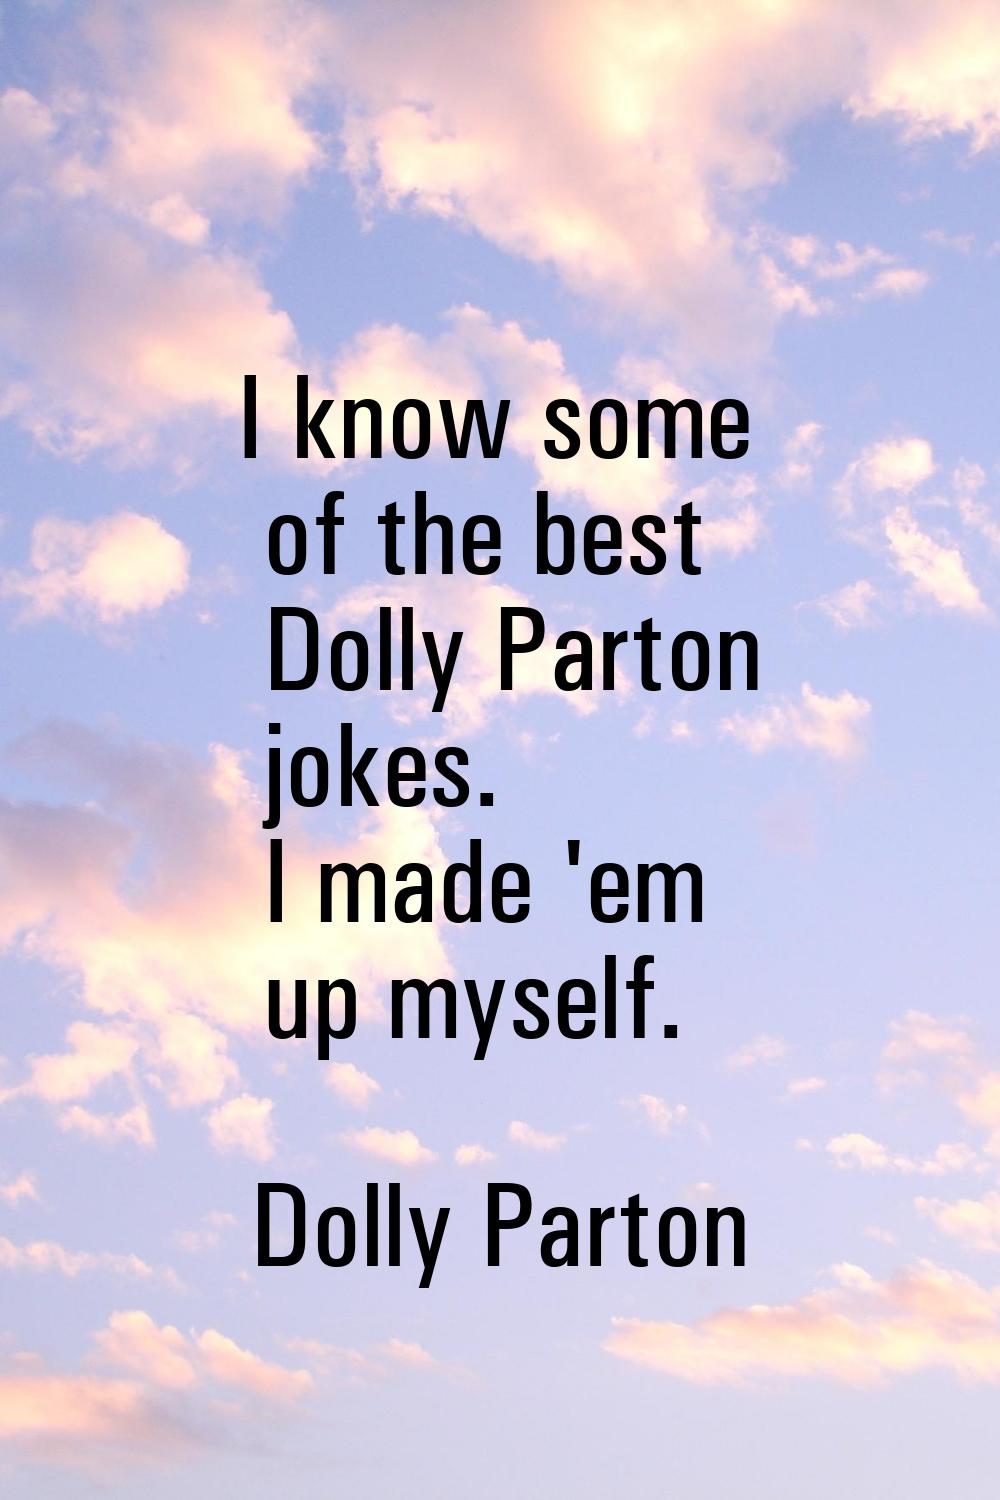 I know some of the best Dolly Parton jokes. I made 'em up myself.